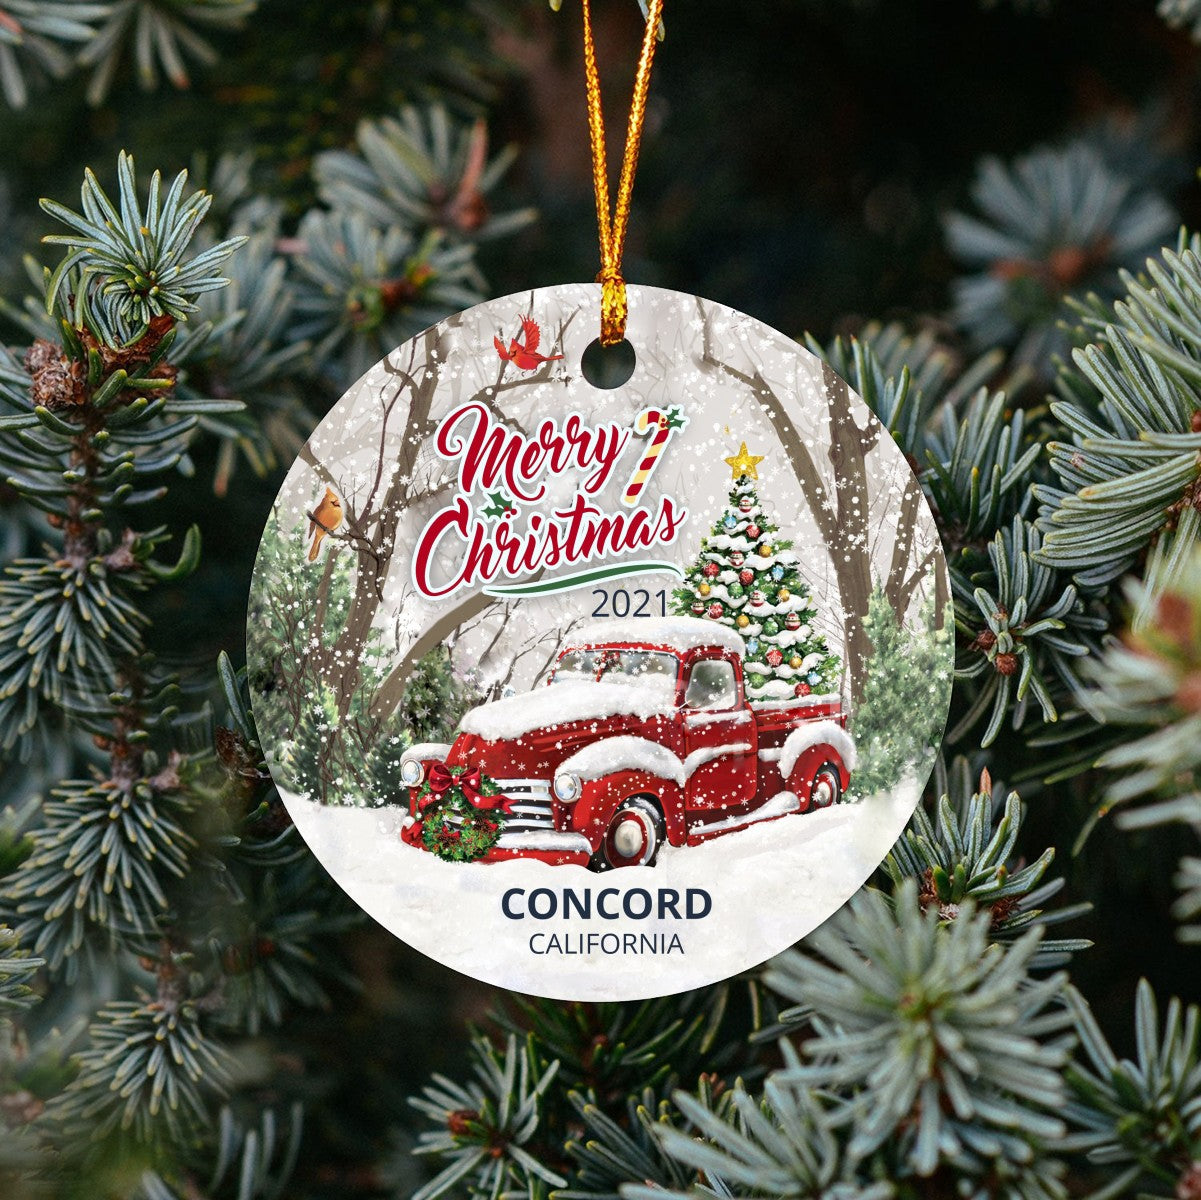 Christmas Tree Ornaments Concord - Ornament Customize With Name City And State Concord California CA - Red Truck Xmas Ornaments 3'' Plastic Gift For Family, Friend And Housewarming